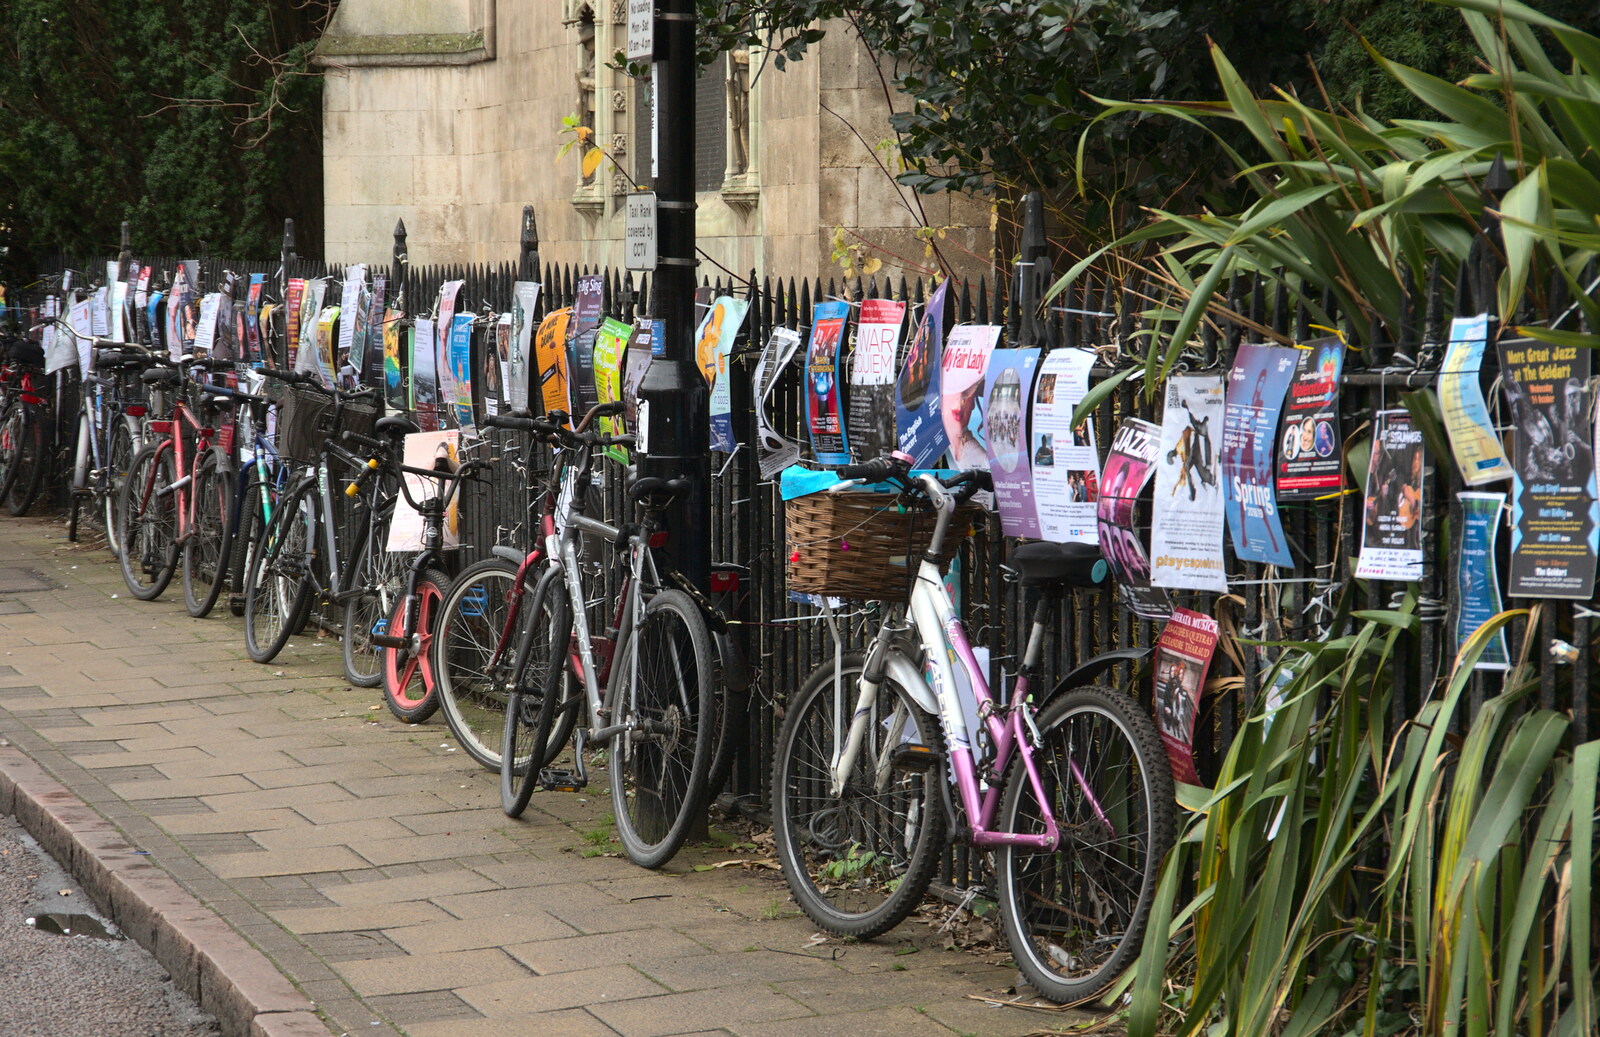 Bikes and posters from The SwiftKey Reunion Brunch, Regent Street, Cambridge - 12th January 2019